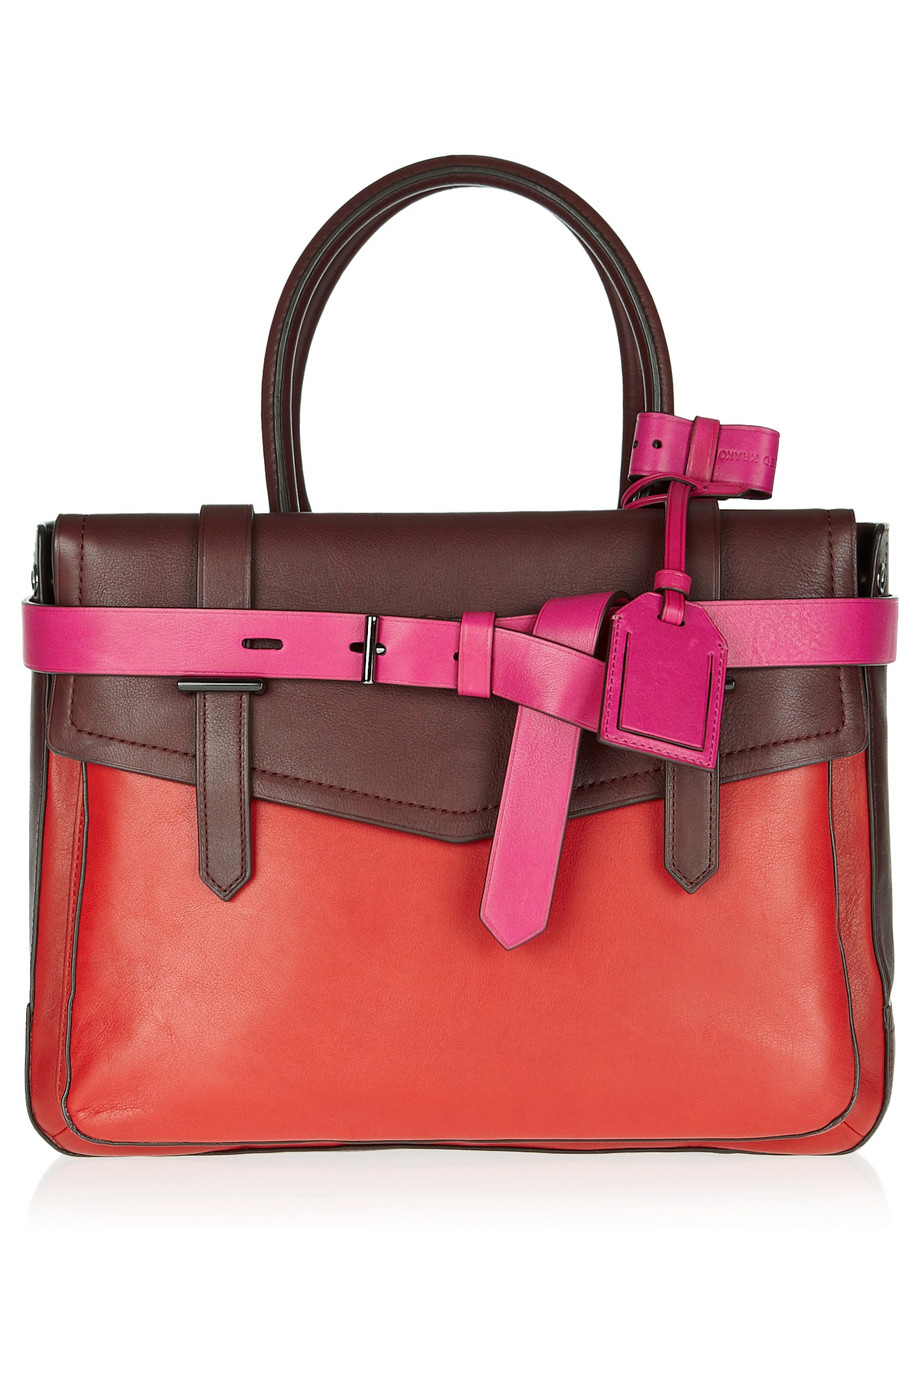 The Game Changer: The Red Tote